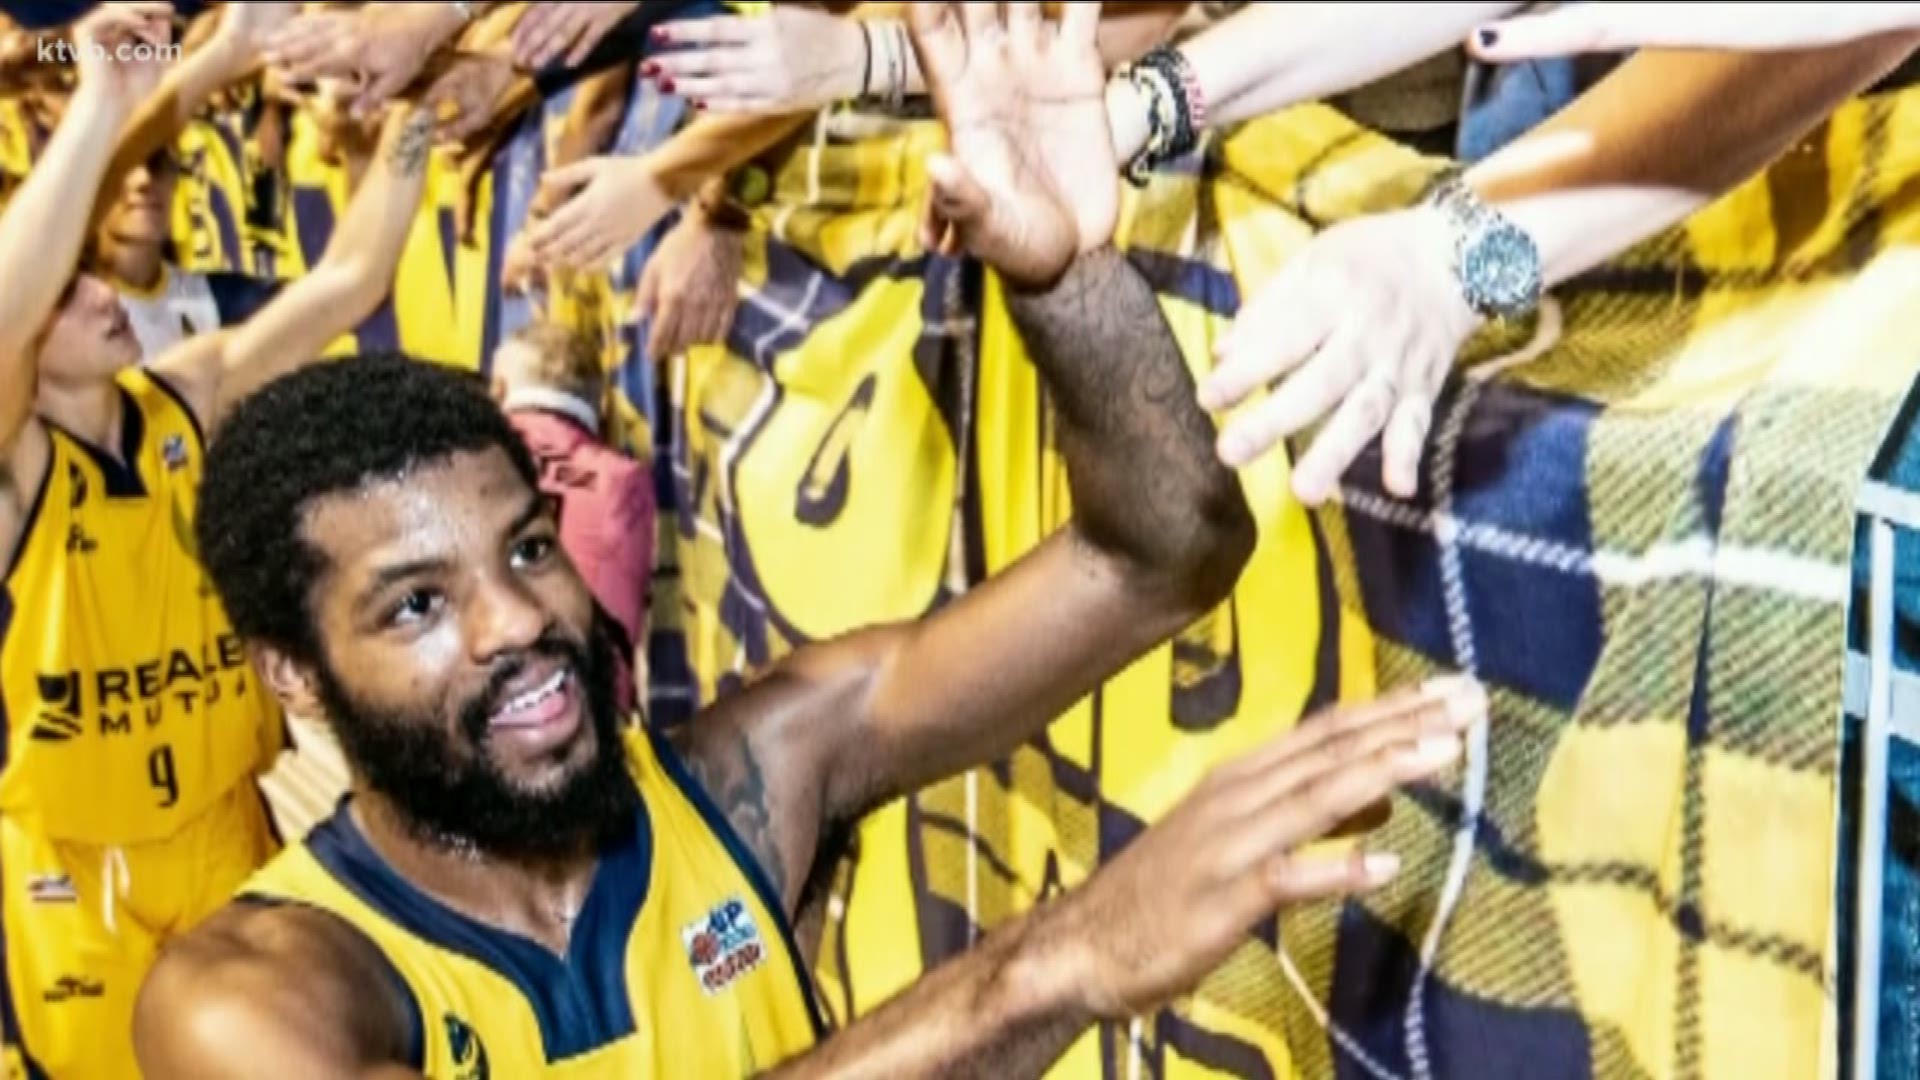 Derrick Marks plays in an Italian basketball league and now is under lockdown because of the coronavirus outbreak.